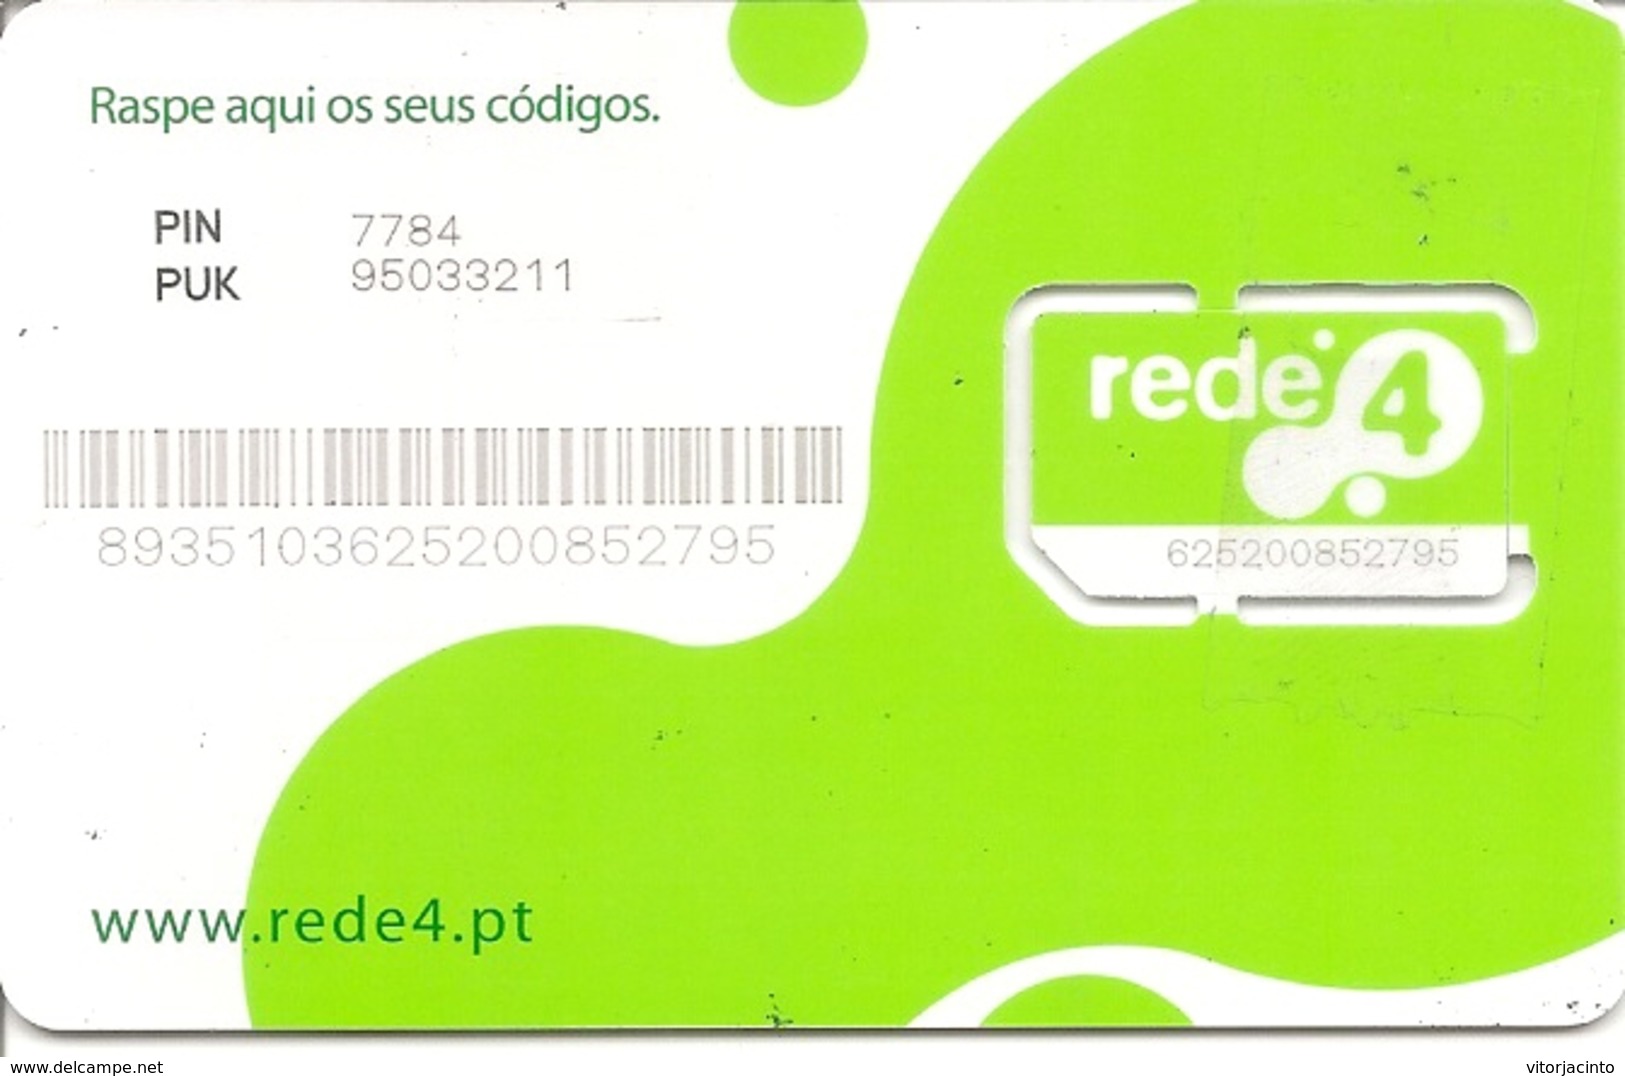 REDE4 SimCard GSM - Portugal - Portugal